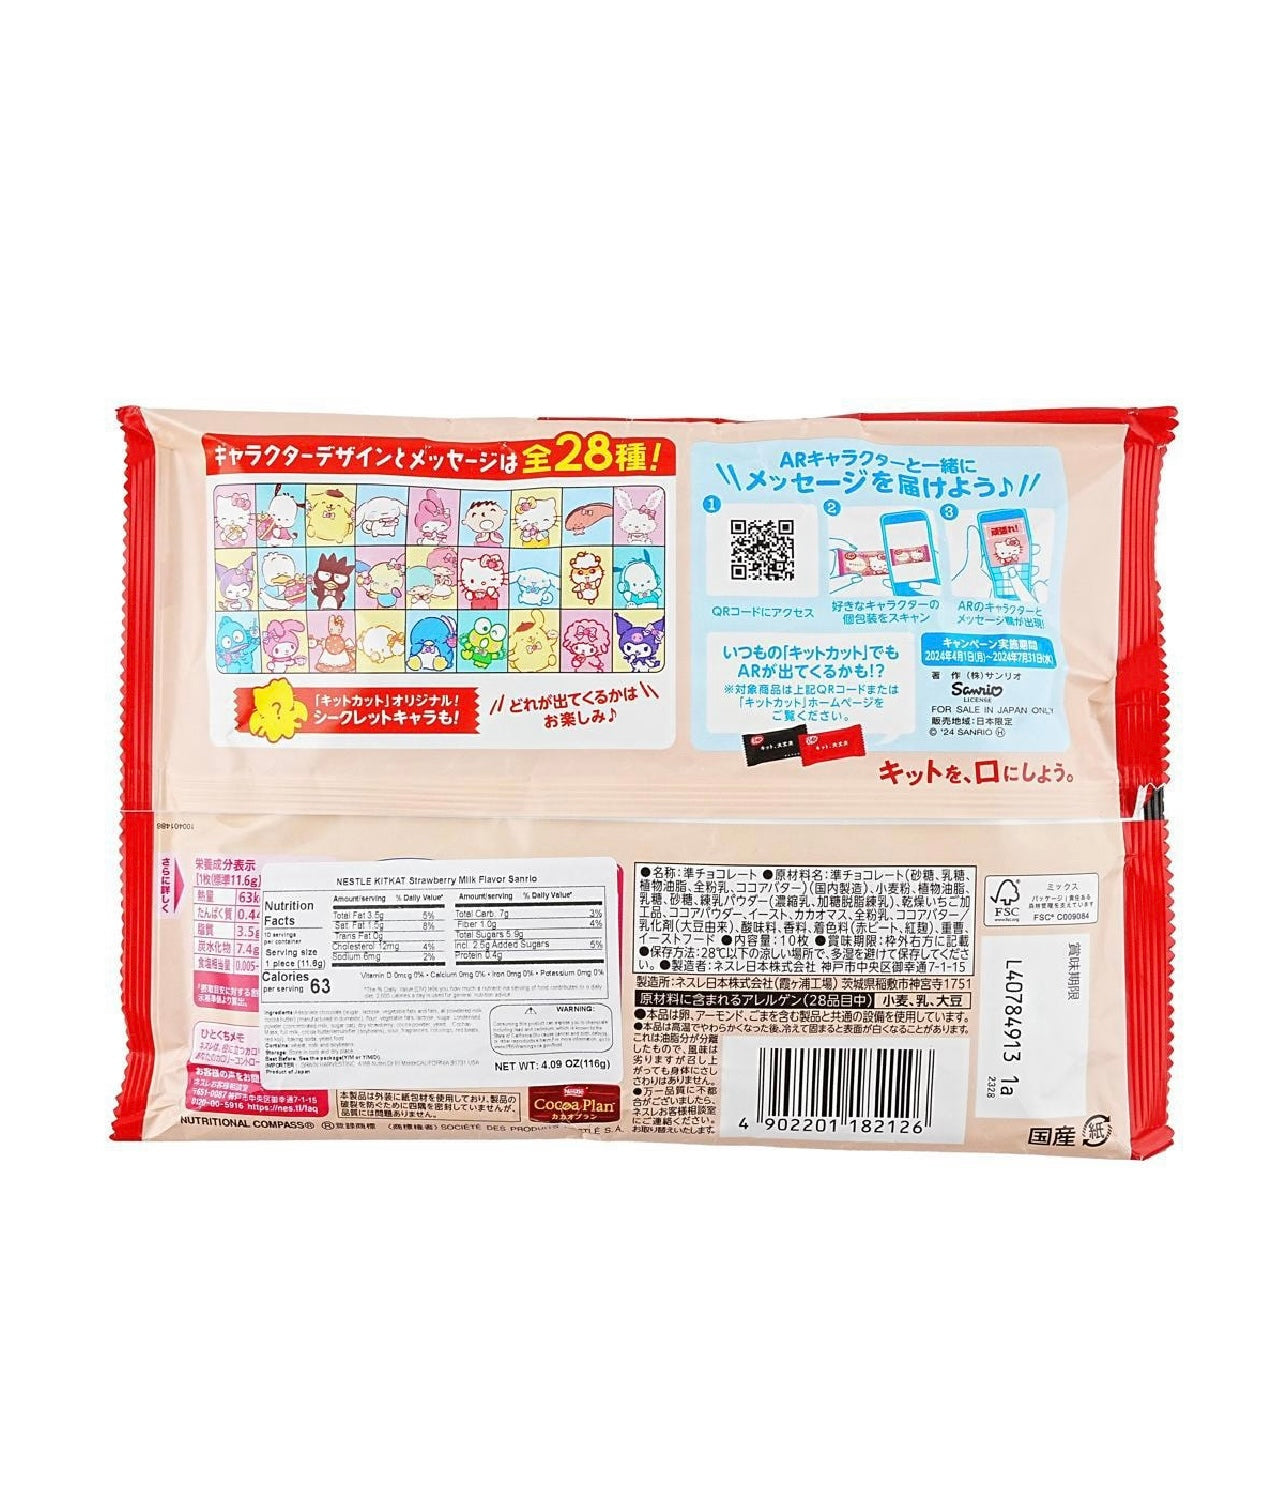 KitKat Strawberry Milk Flavored Waffle Cookies 10pieces 4.09 oz - Japan